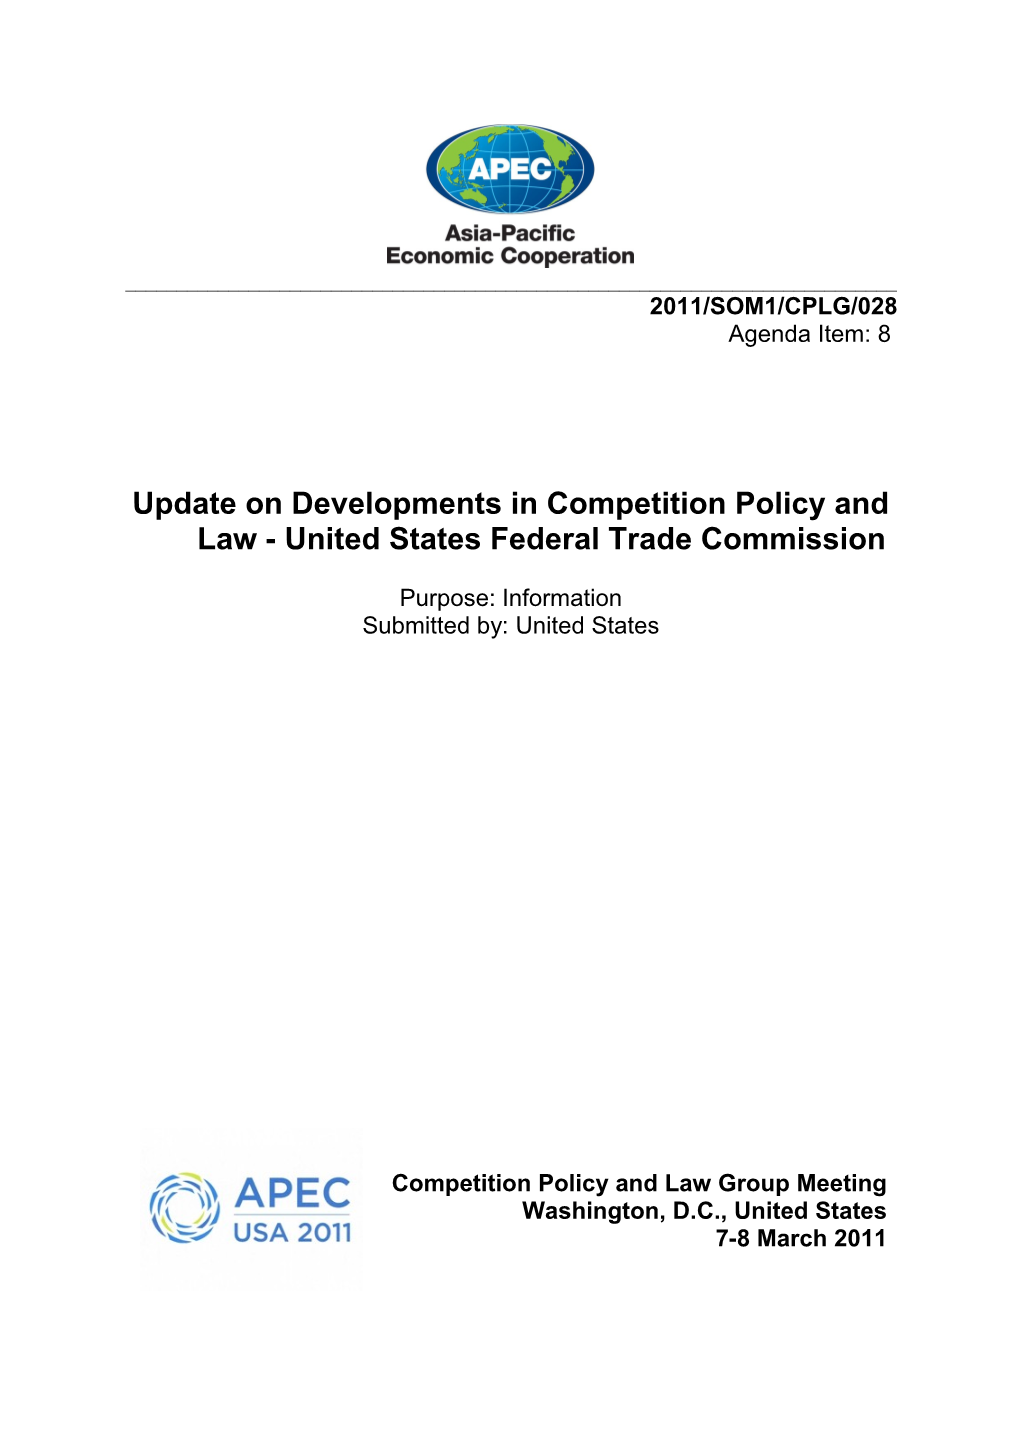 Update on Developments in Competition Policy and Law - United States Federal Trade Commission